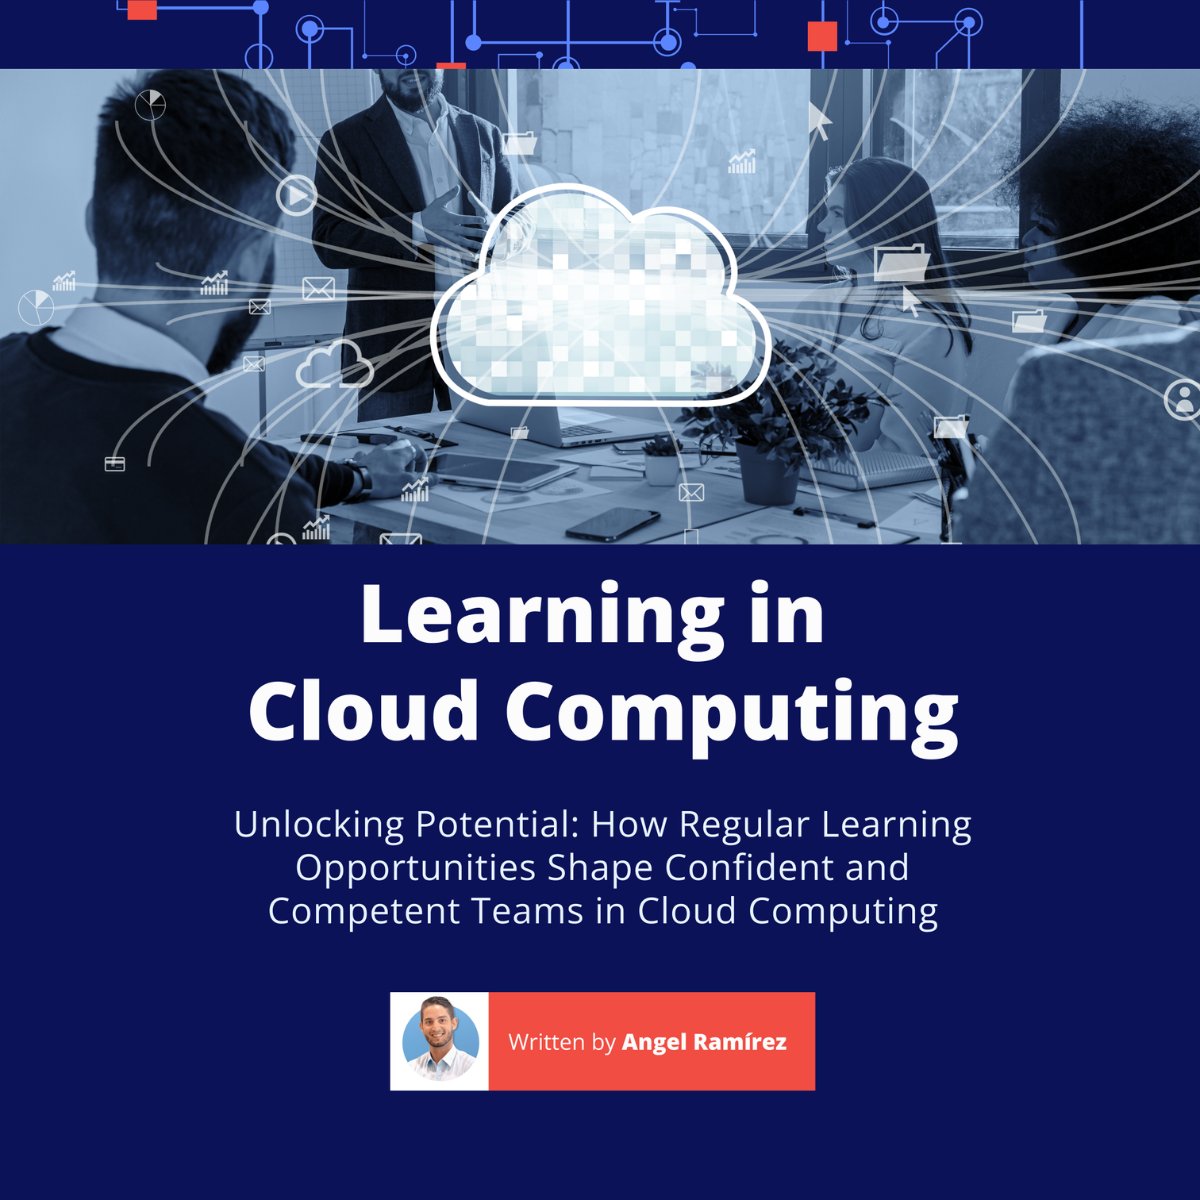 ⬆️Elevate your team through continuous learning! Regular training fills skill gaps, boosts confidence, and keeps everyone at the forefront of cloud computing, leading to reduced stress,📈 increased productivity, and overall team success. 💻🚀 #CloudLearning #TeamEmpowerment